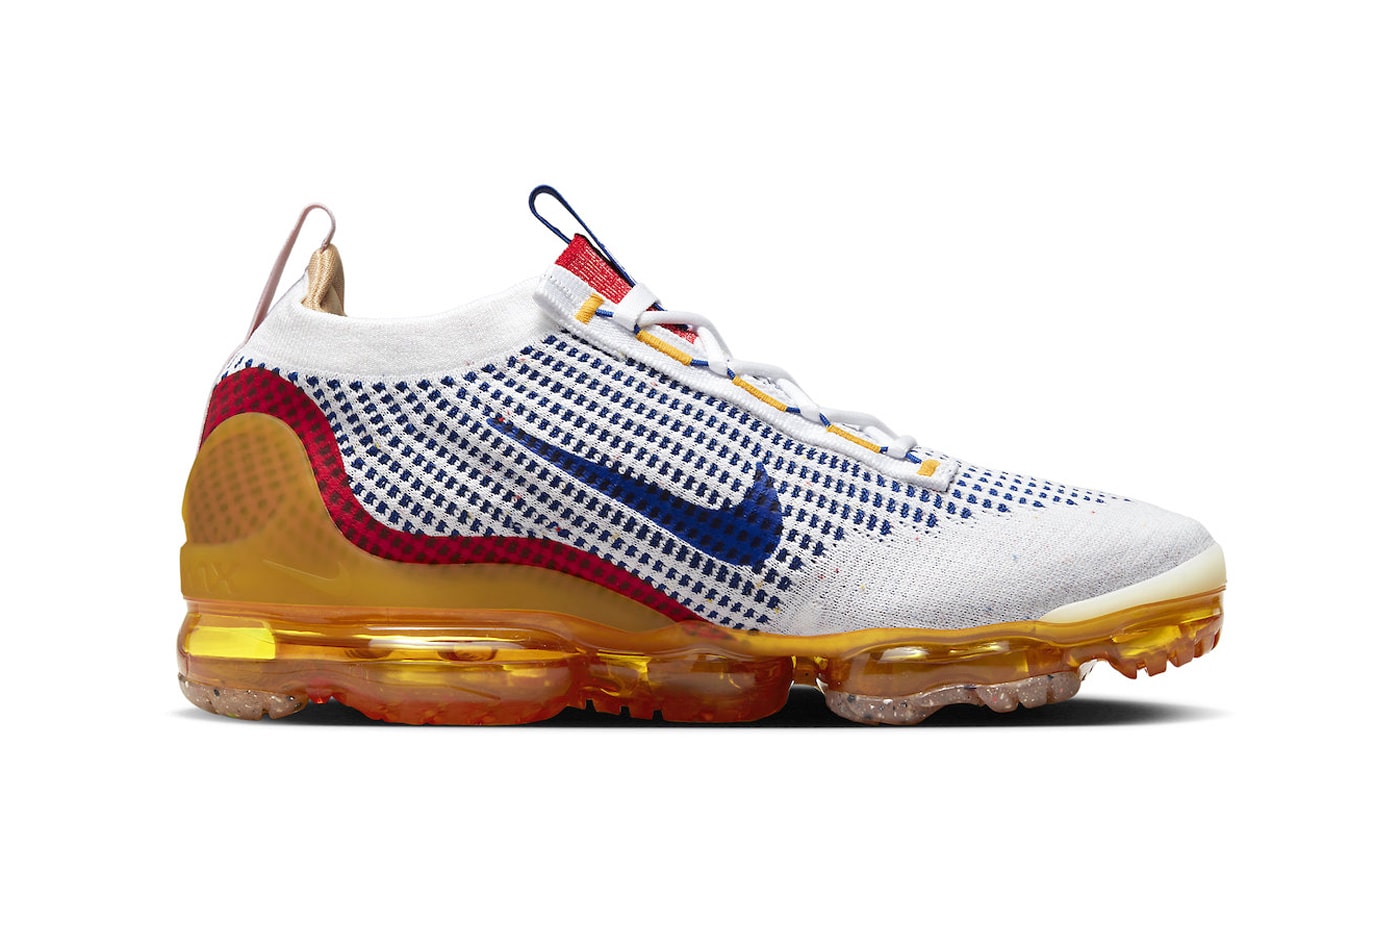 Nike Air Vapormax 2021 Air Pressure Spotlights the Father of Nike Air frank rudy nasa engineer old royal yellow red release info date price